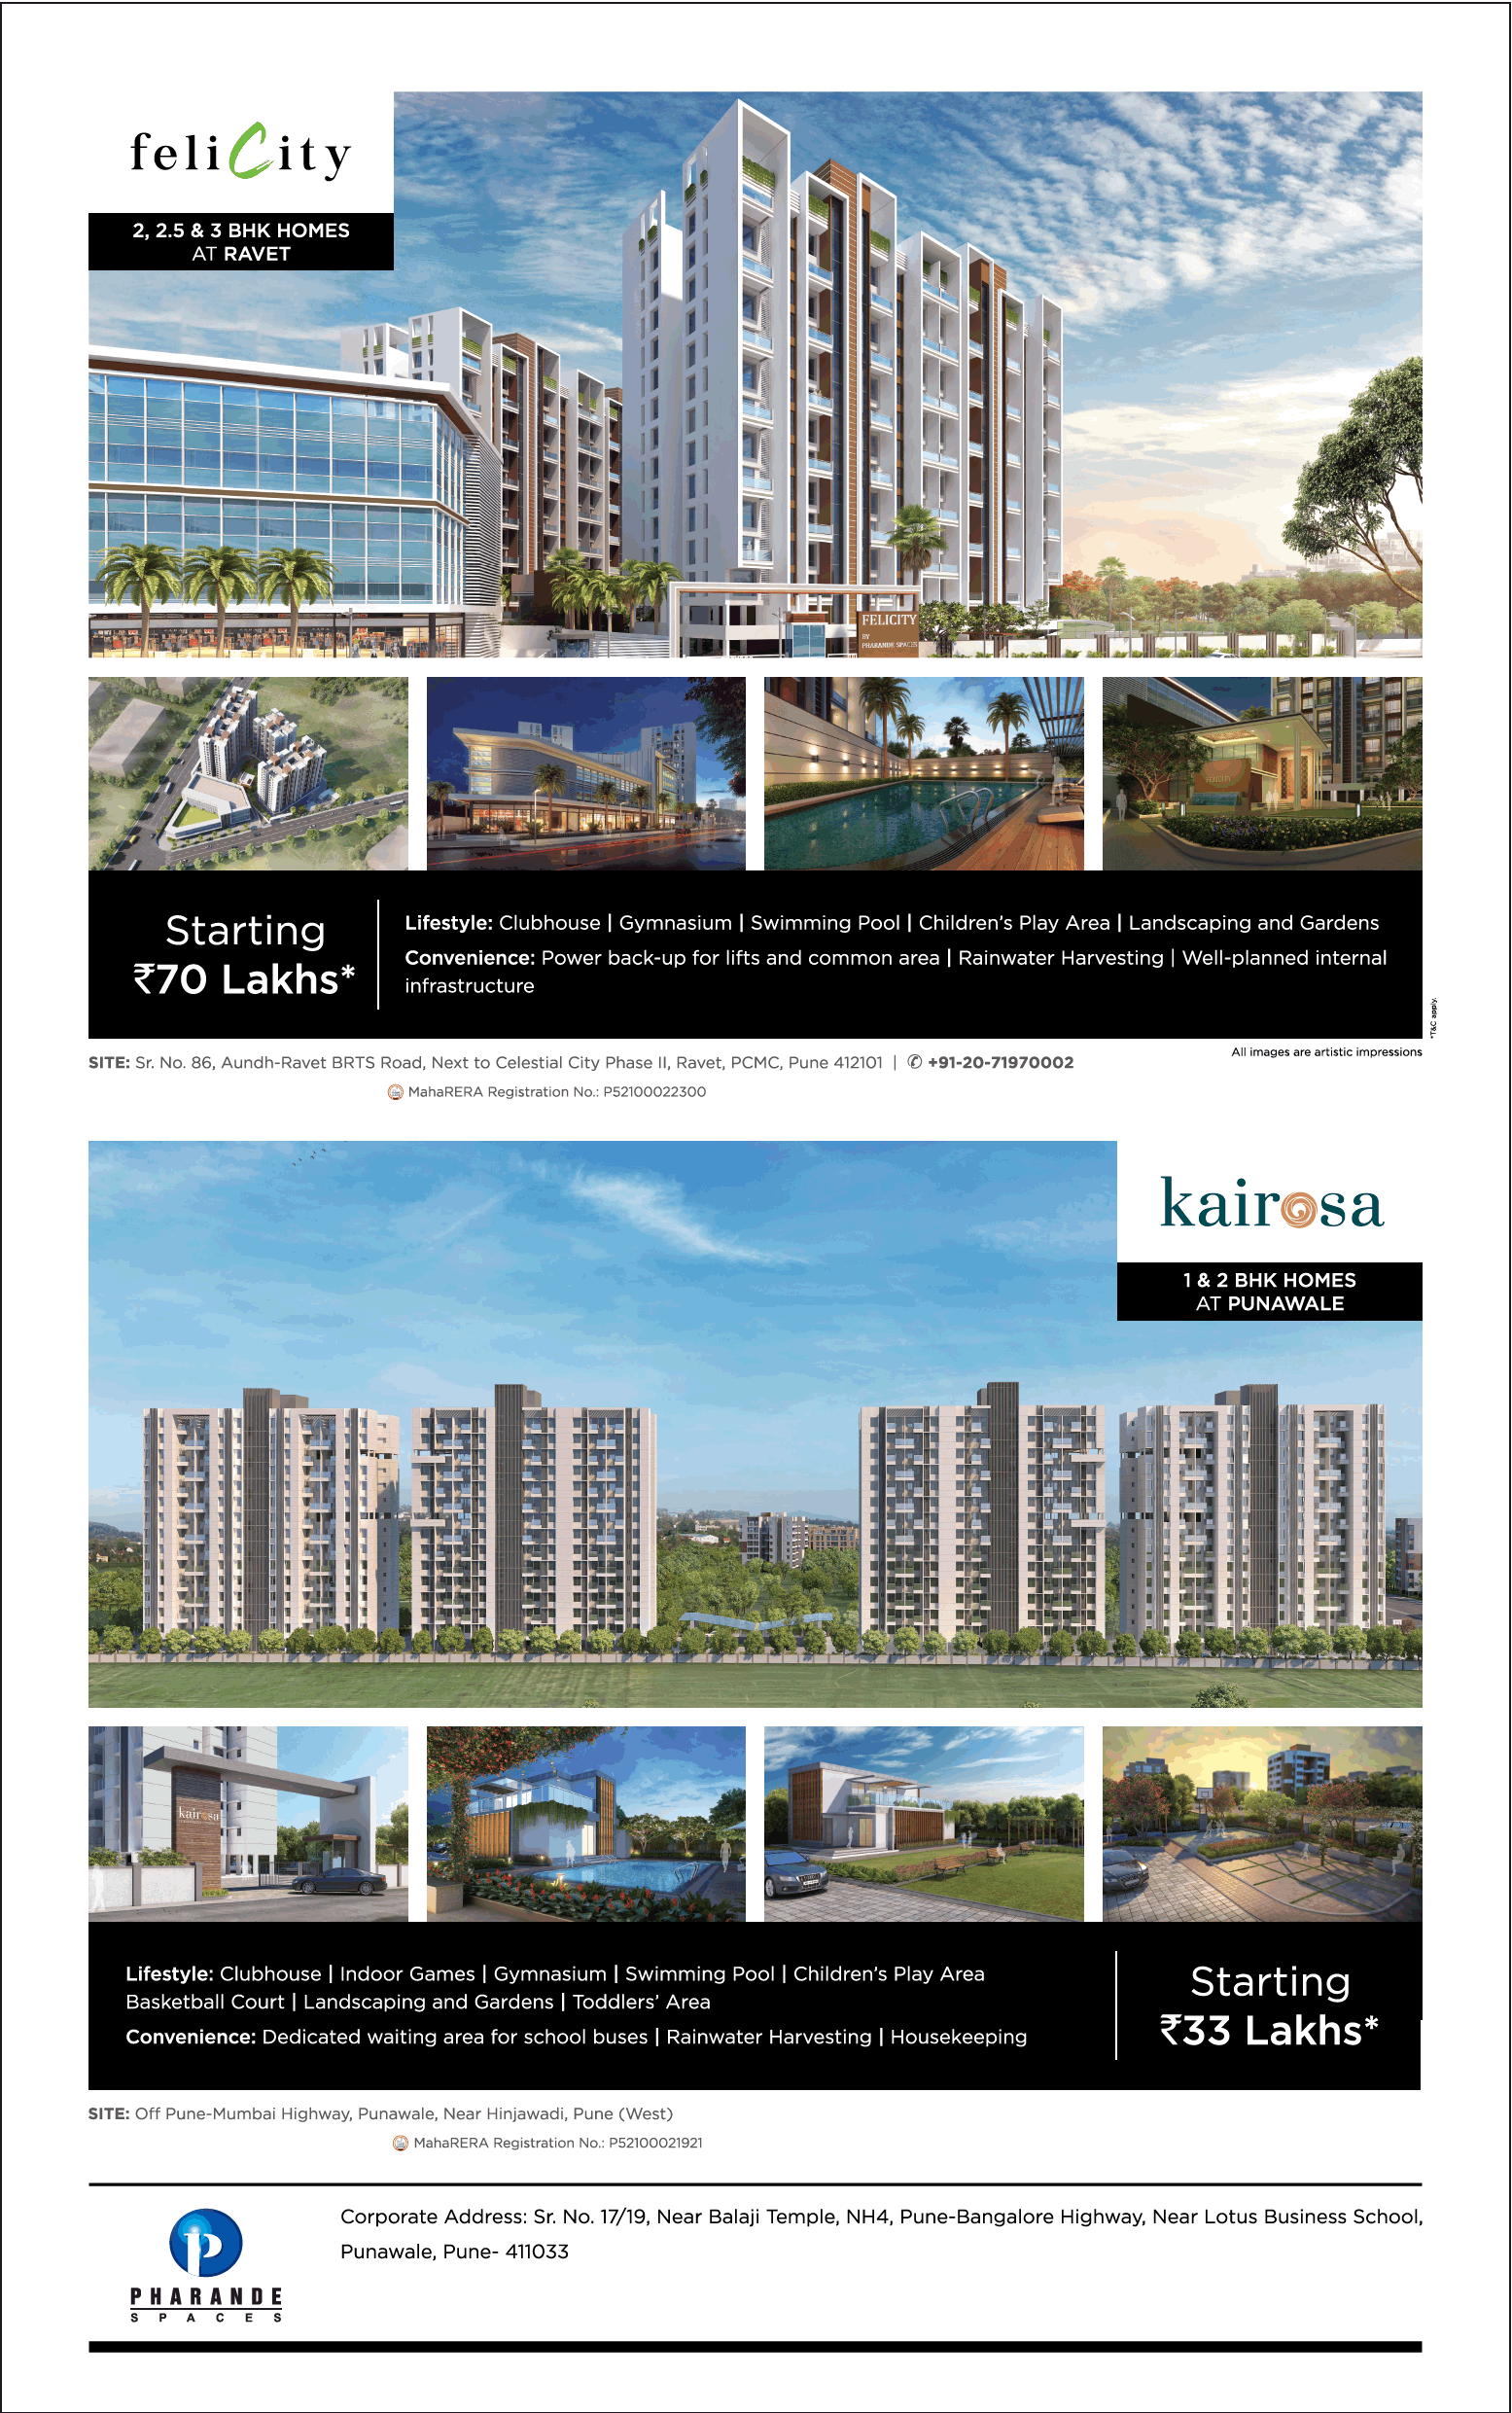 2, 2.5 and 3 BHK homes at Pharande Felicity, Pune